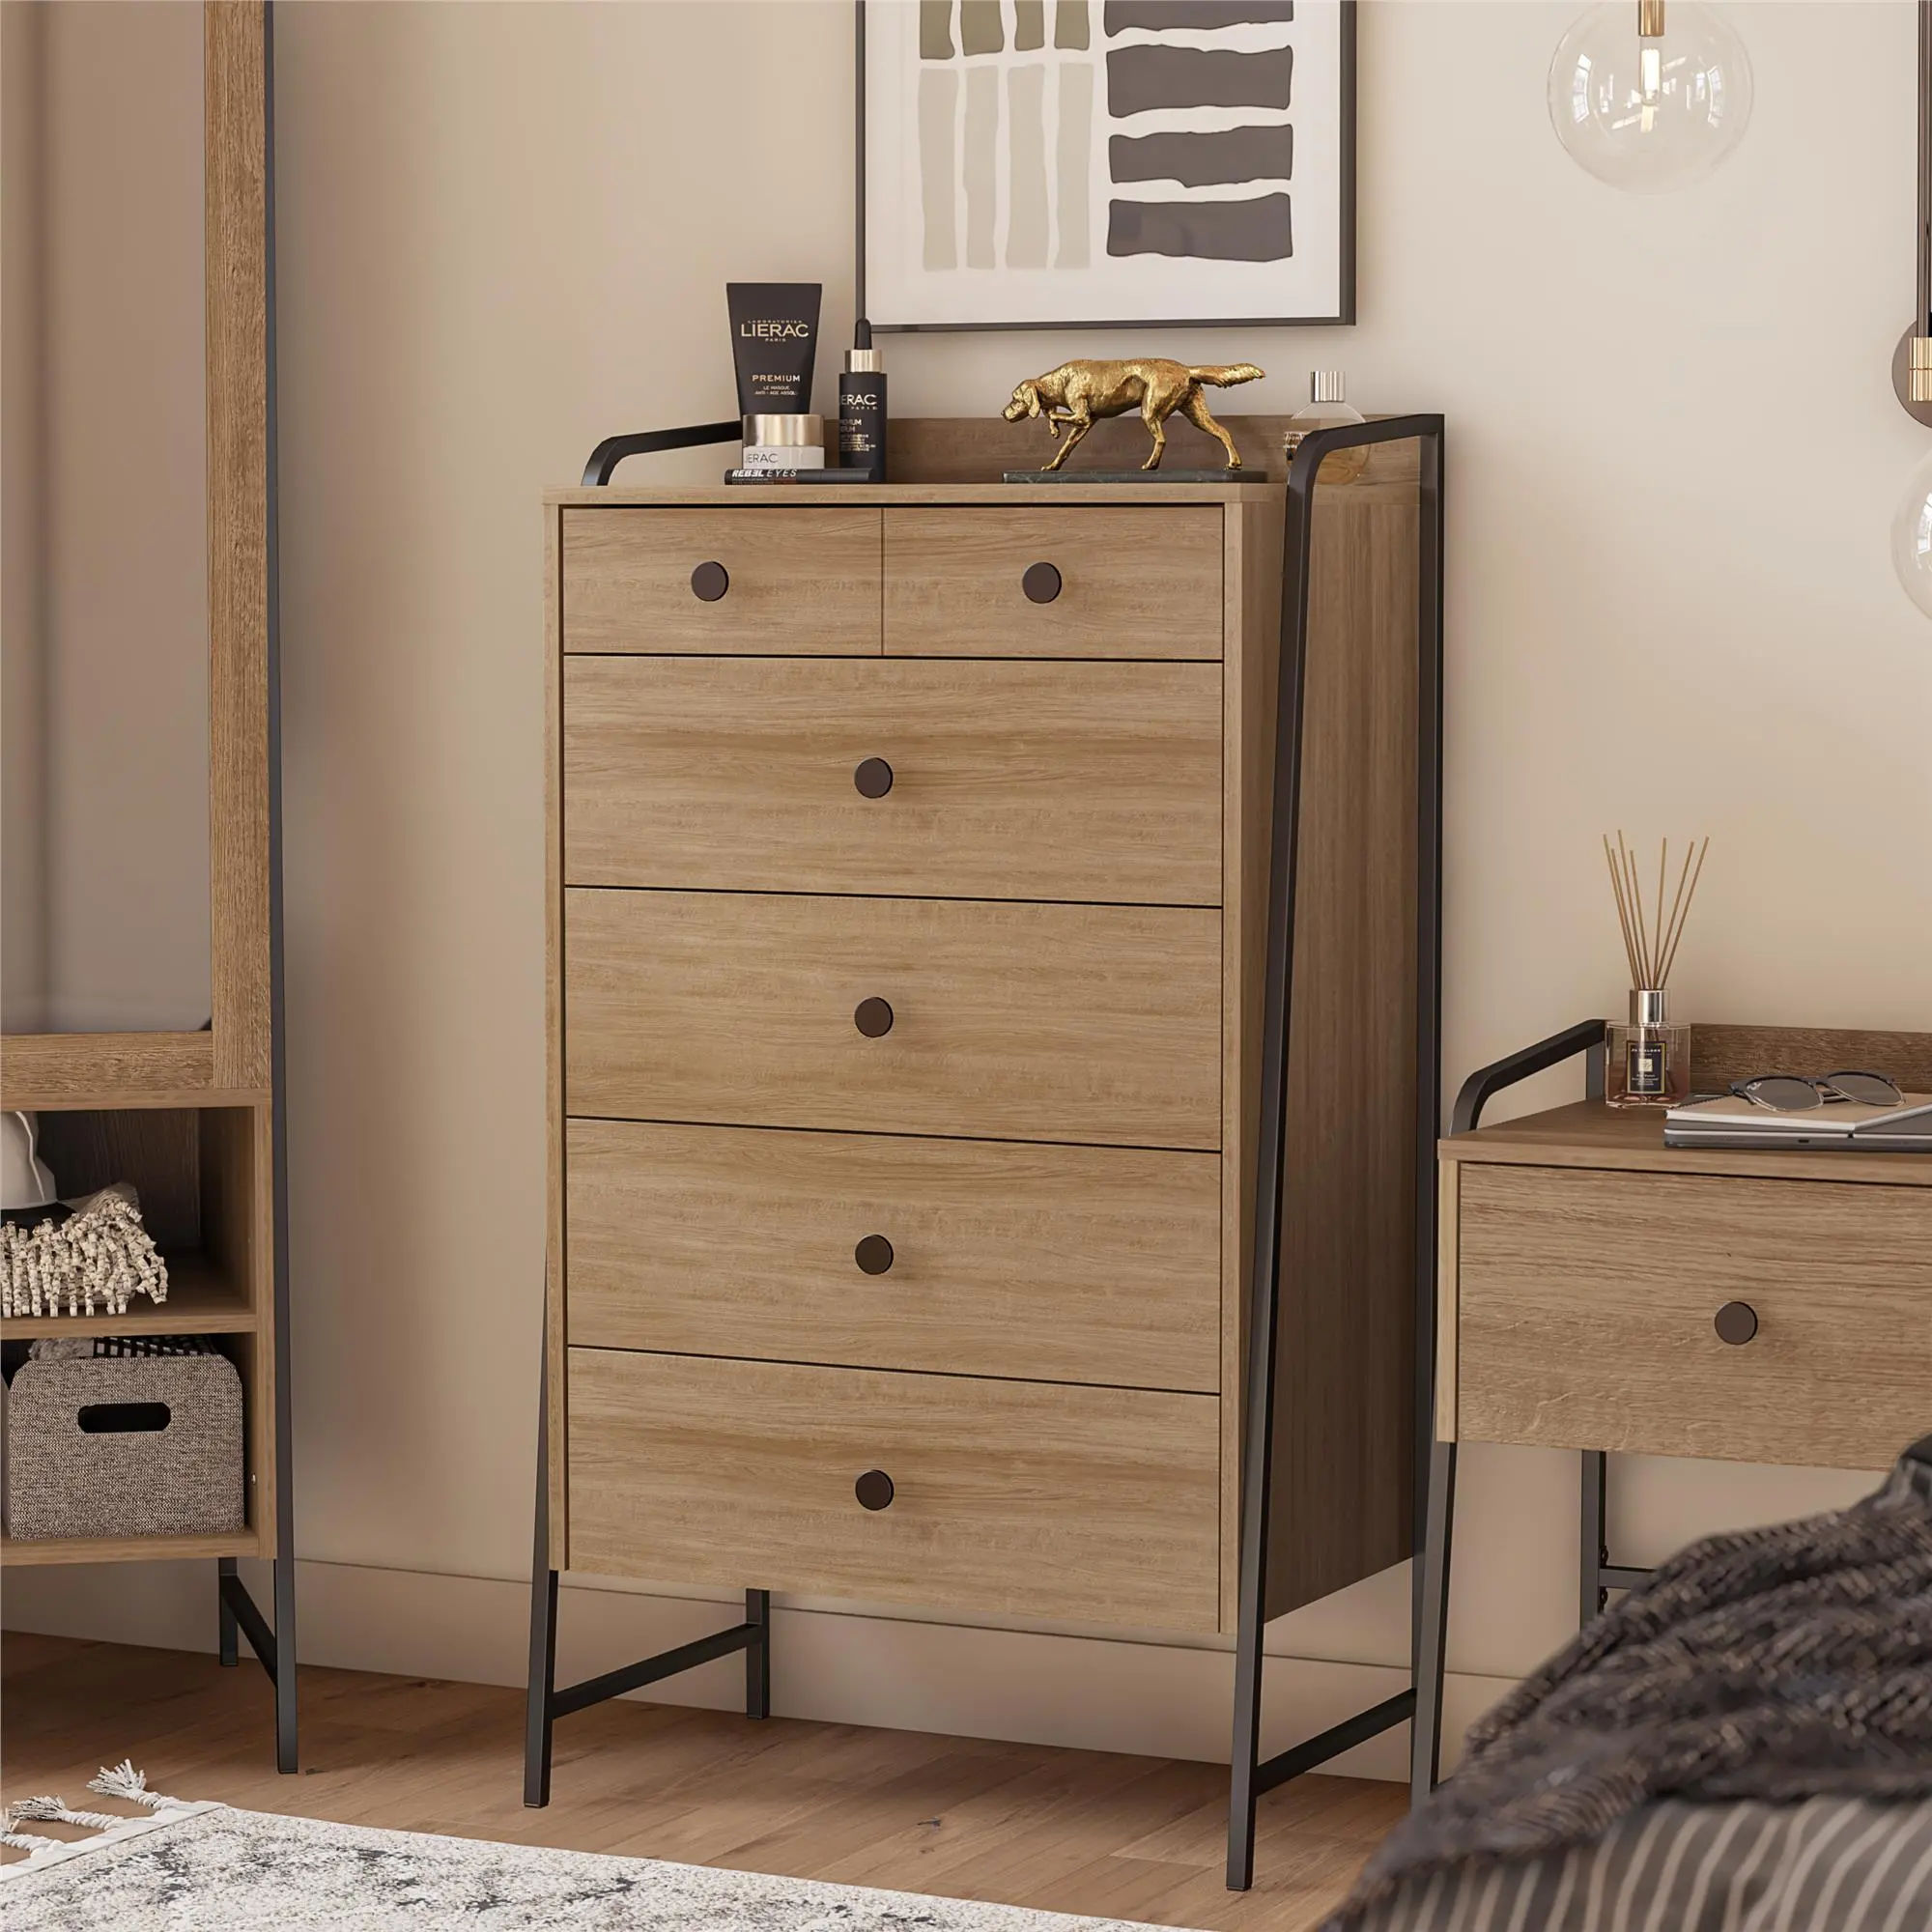 Photos - Dresser / Chests of Drawers Dorel Home Bushwick Natural 5 Drawer Chest of Drawers 1659348COM